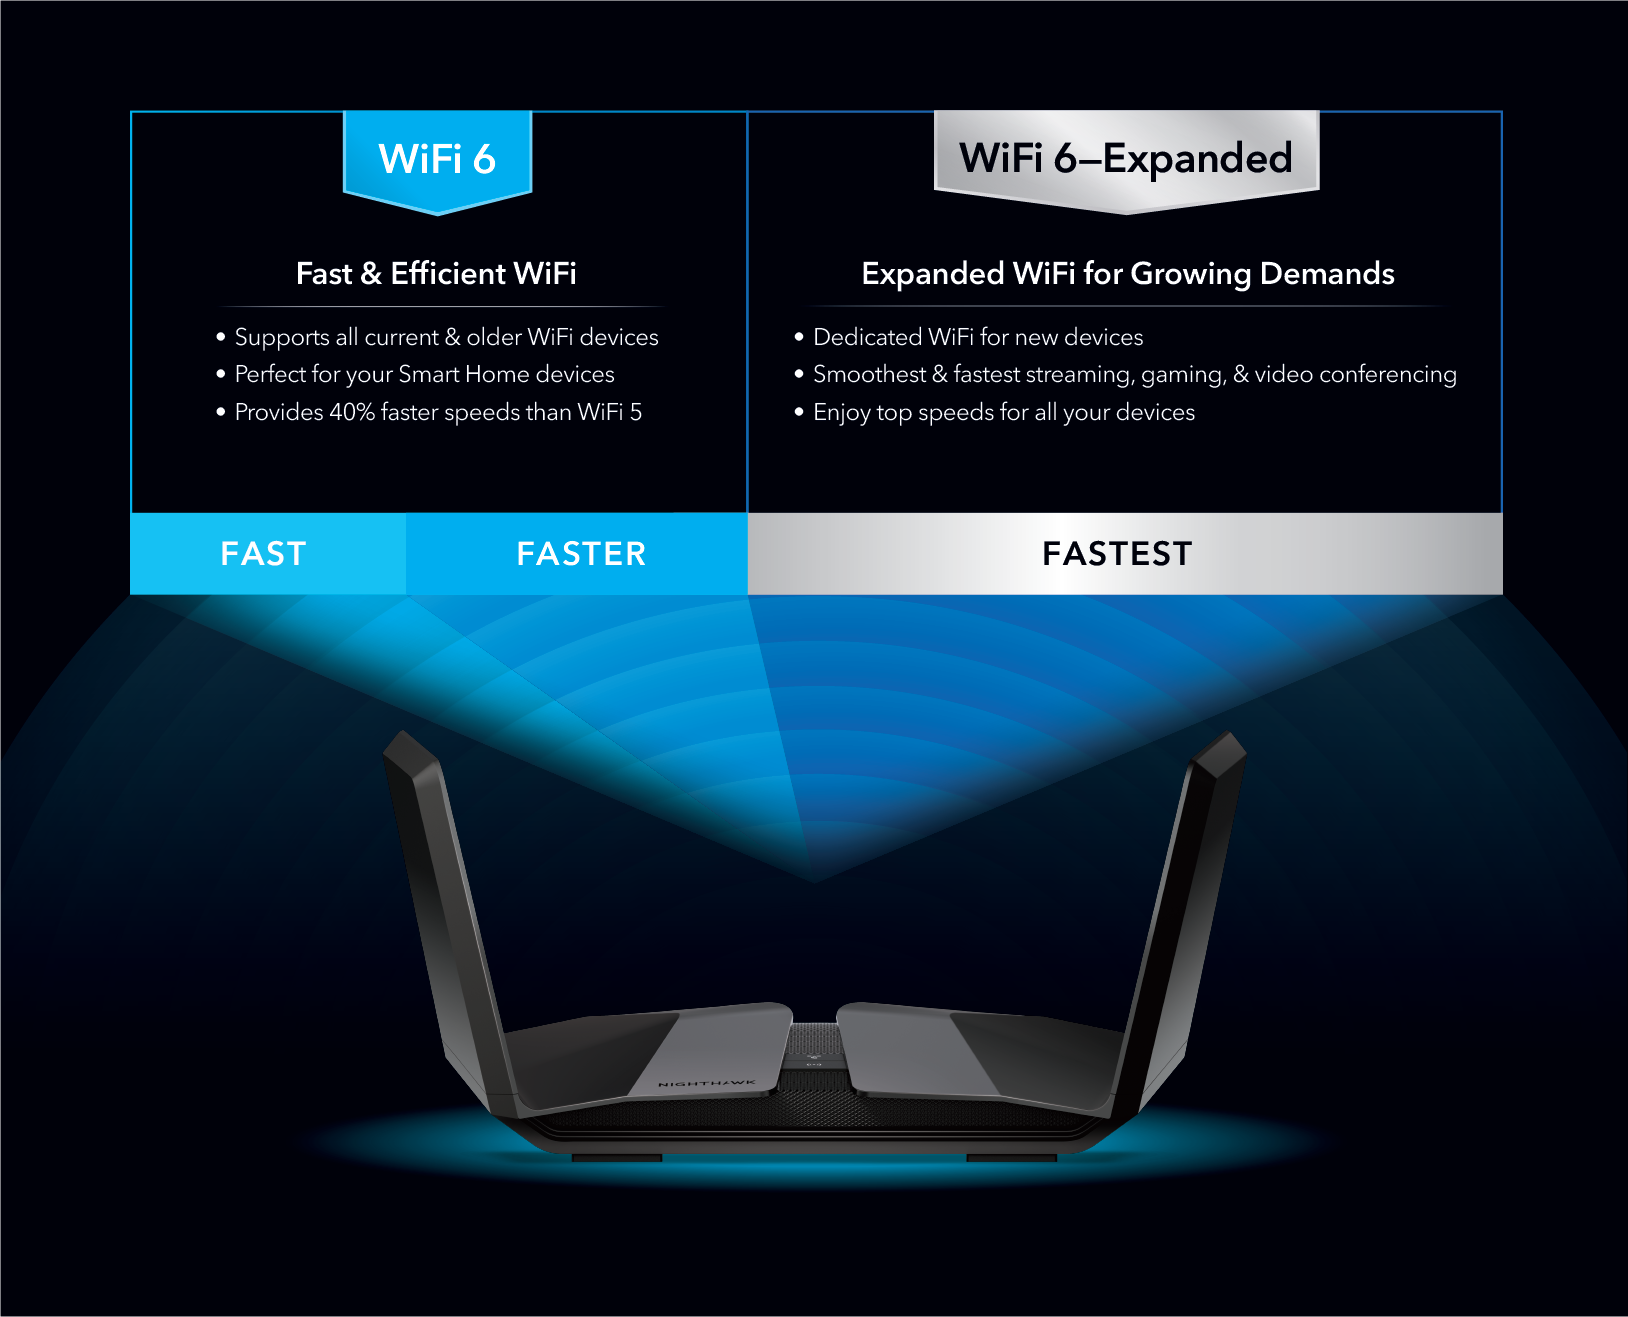 WiFi 6E technology adds an all-new 6GHz WiFi band— an extra-fast